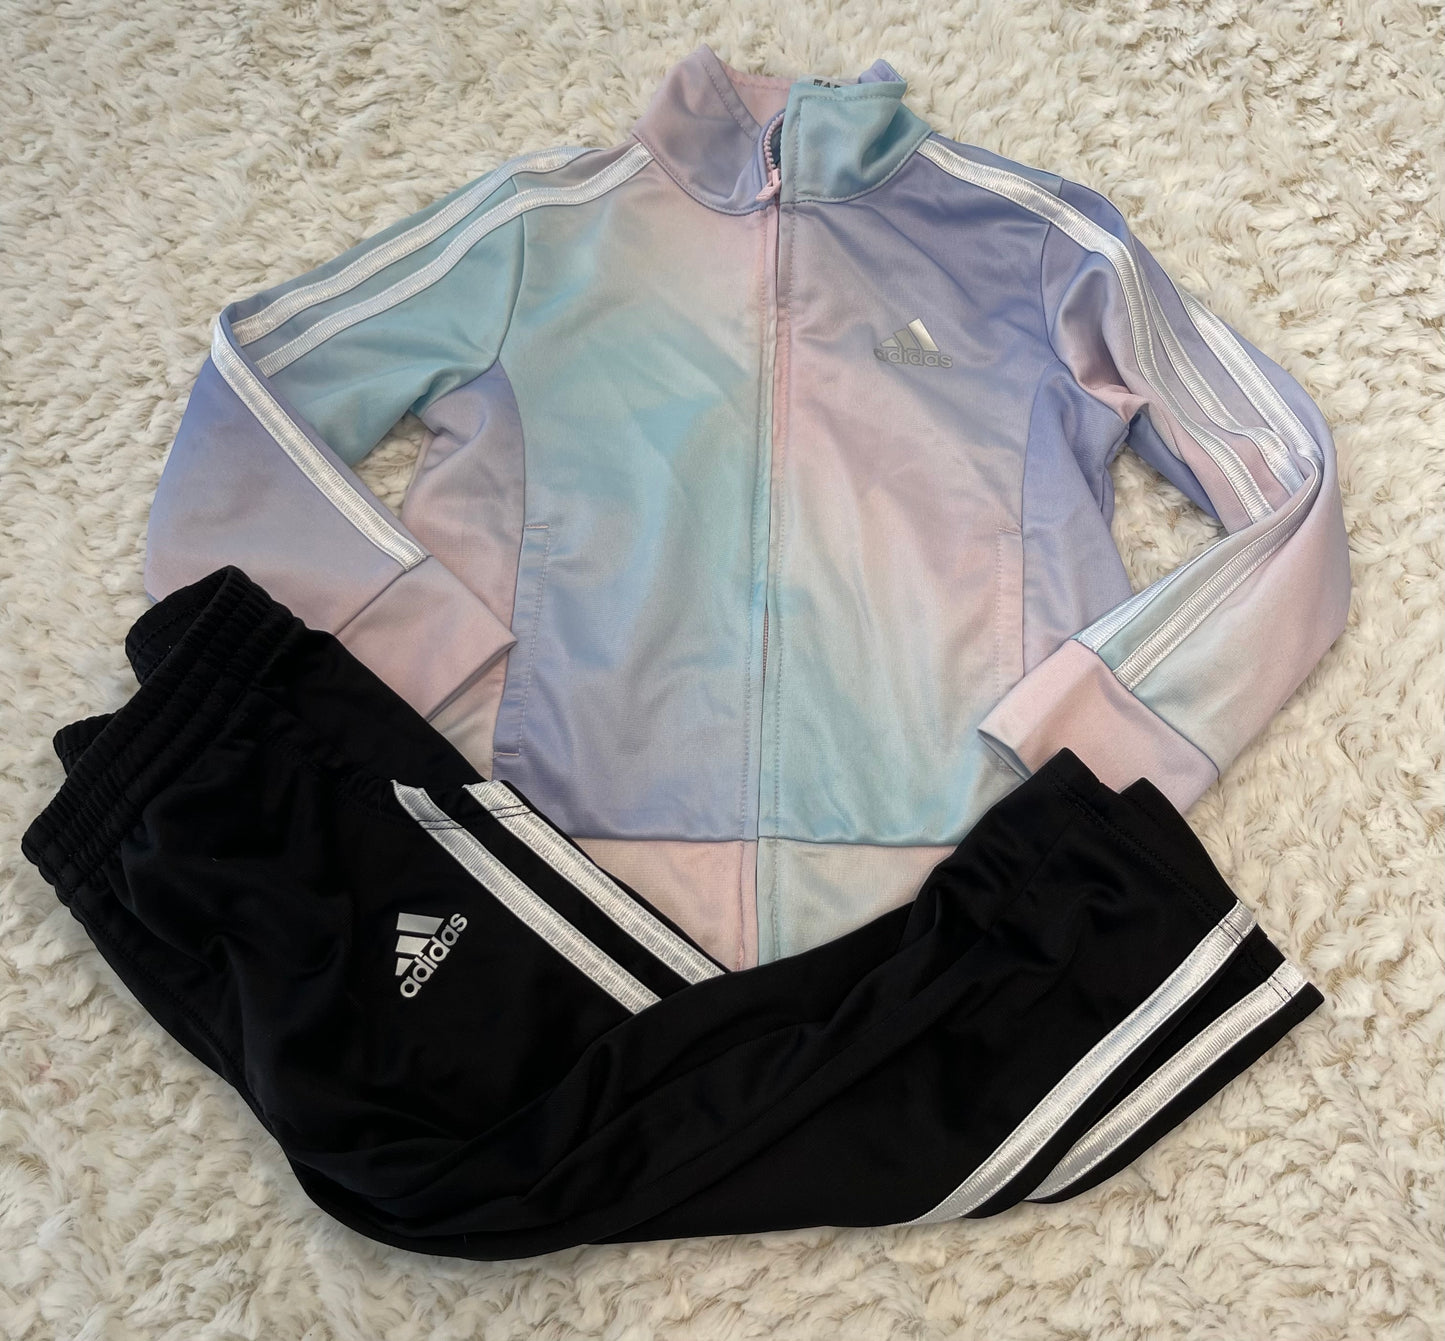 3T adidas outfit